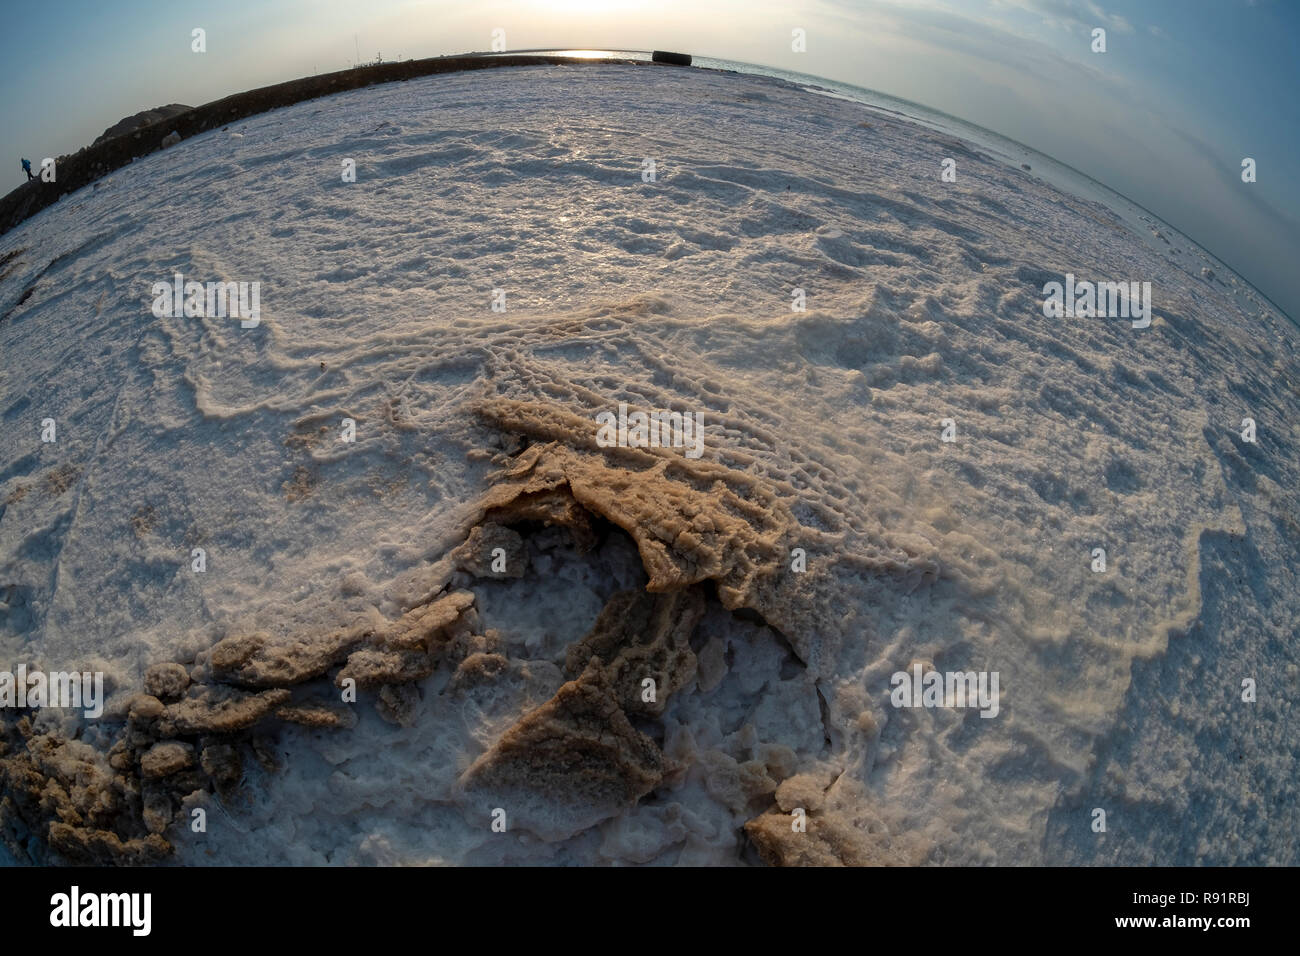 Israel, Dead Sea, fisheye view of salt crystalization caused by water evaporation Stock Photo